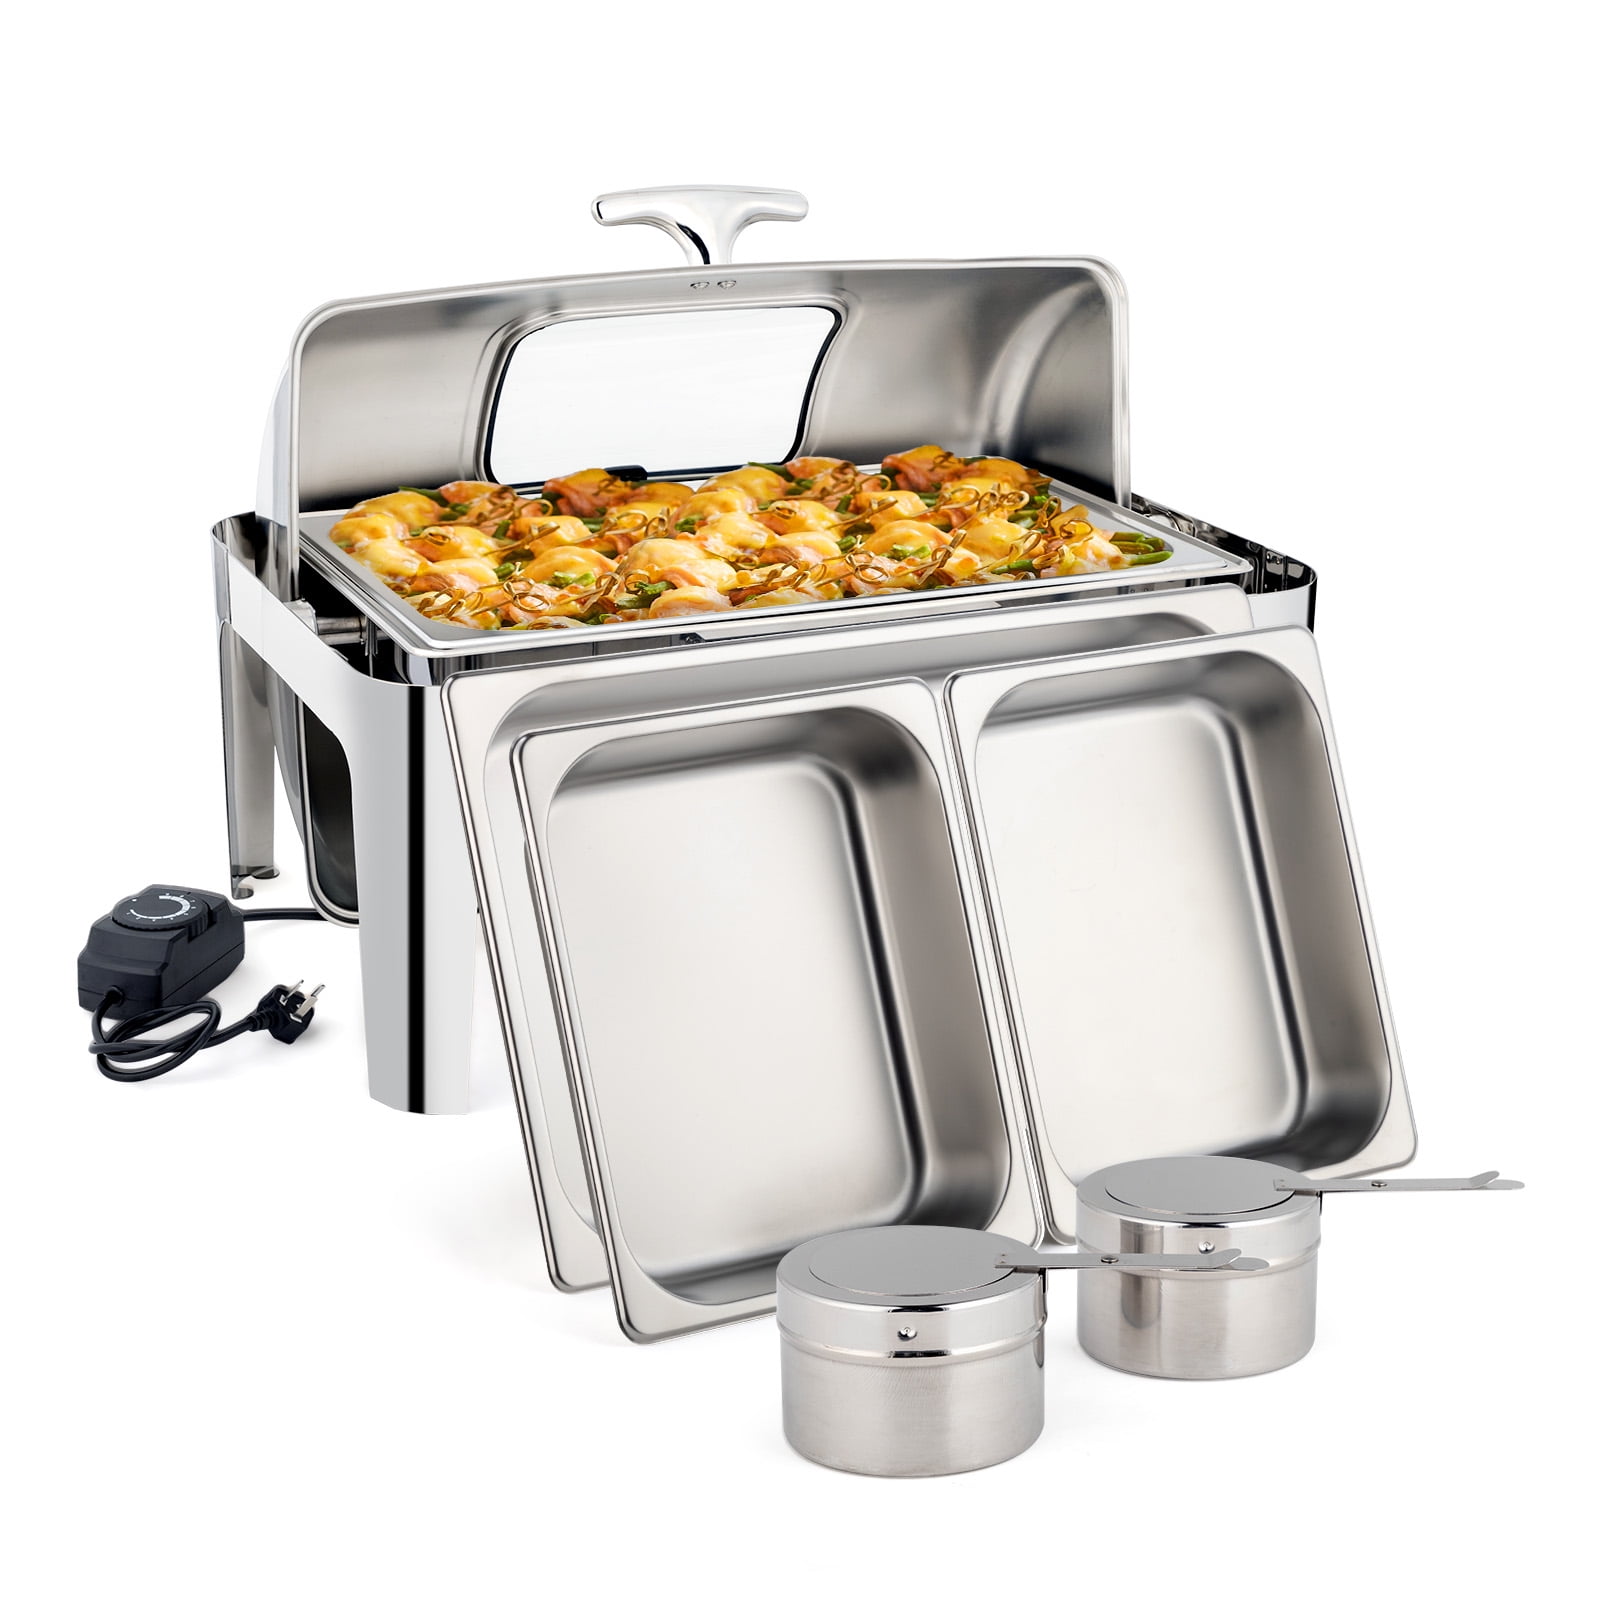 Prep & Savour 9 Quart Commercial Electric Chafing Dish Buffet Food Warmers